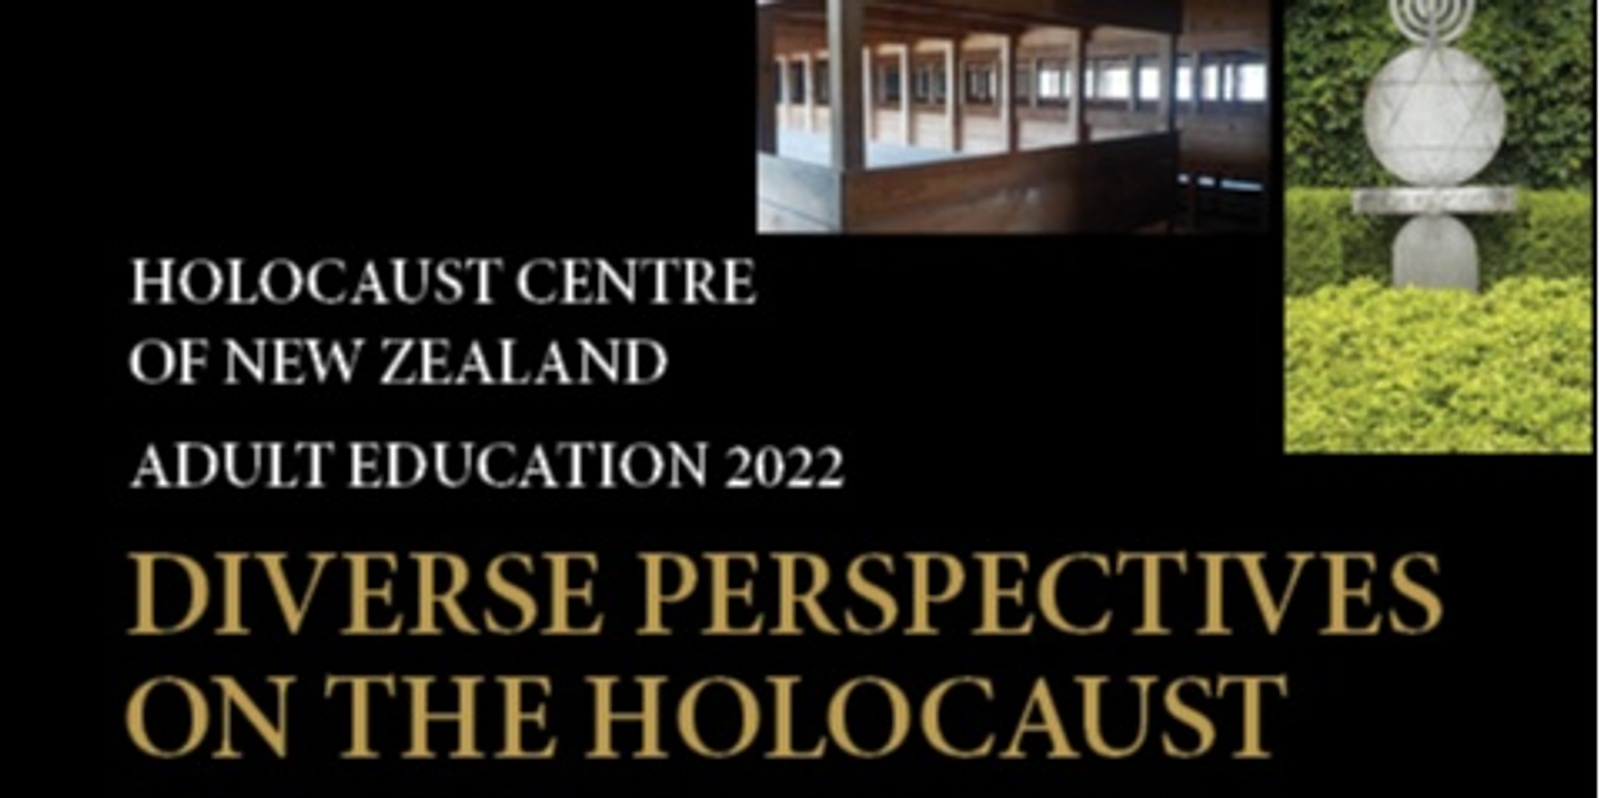 Banner image for Diverse Perspectives On the Holocaust